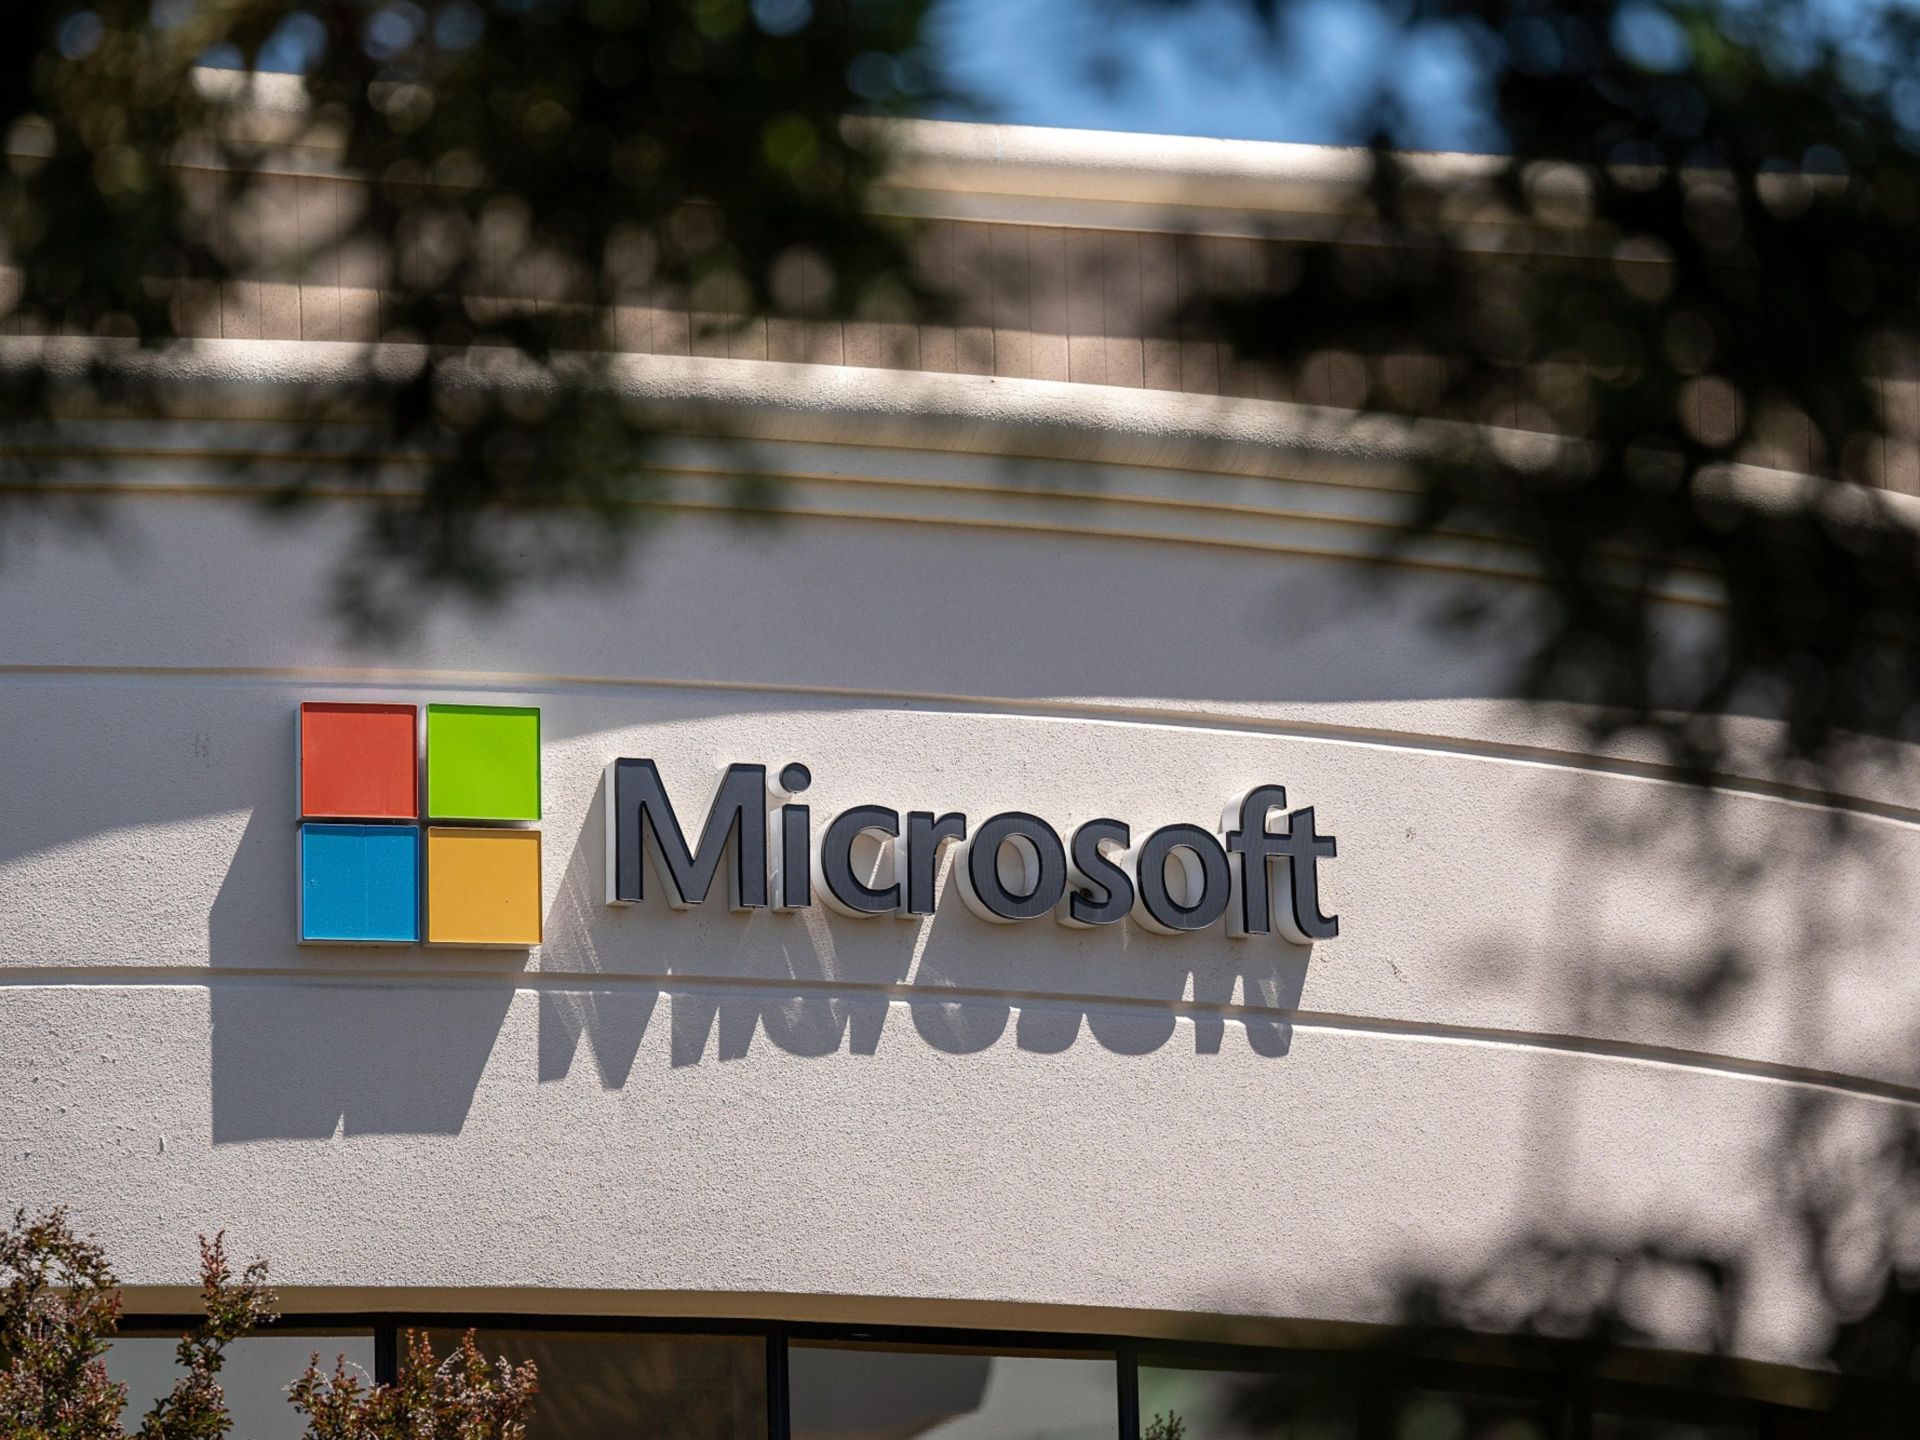 Microsoft takes on Google Search with AI | Technology News